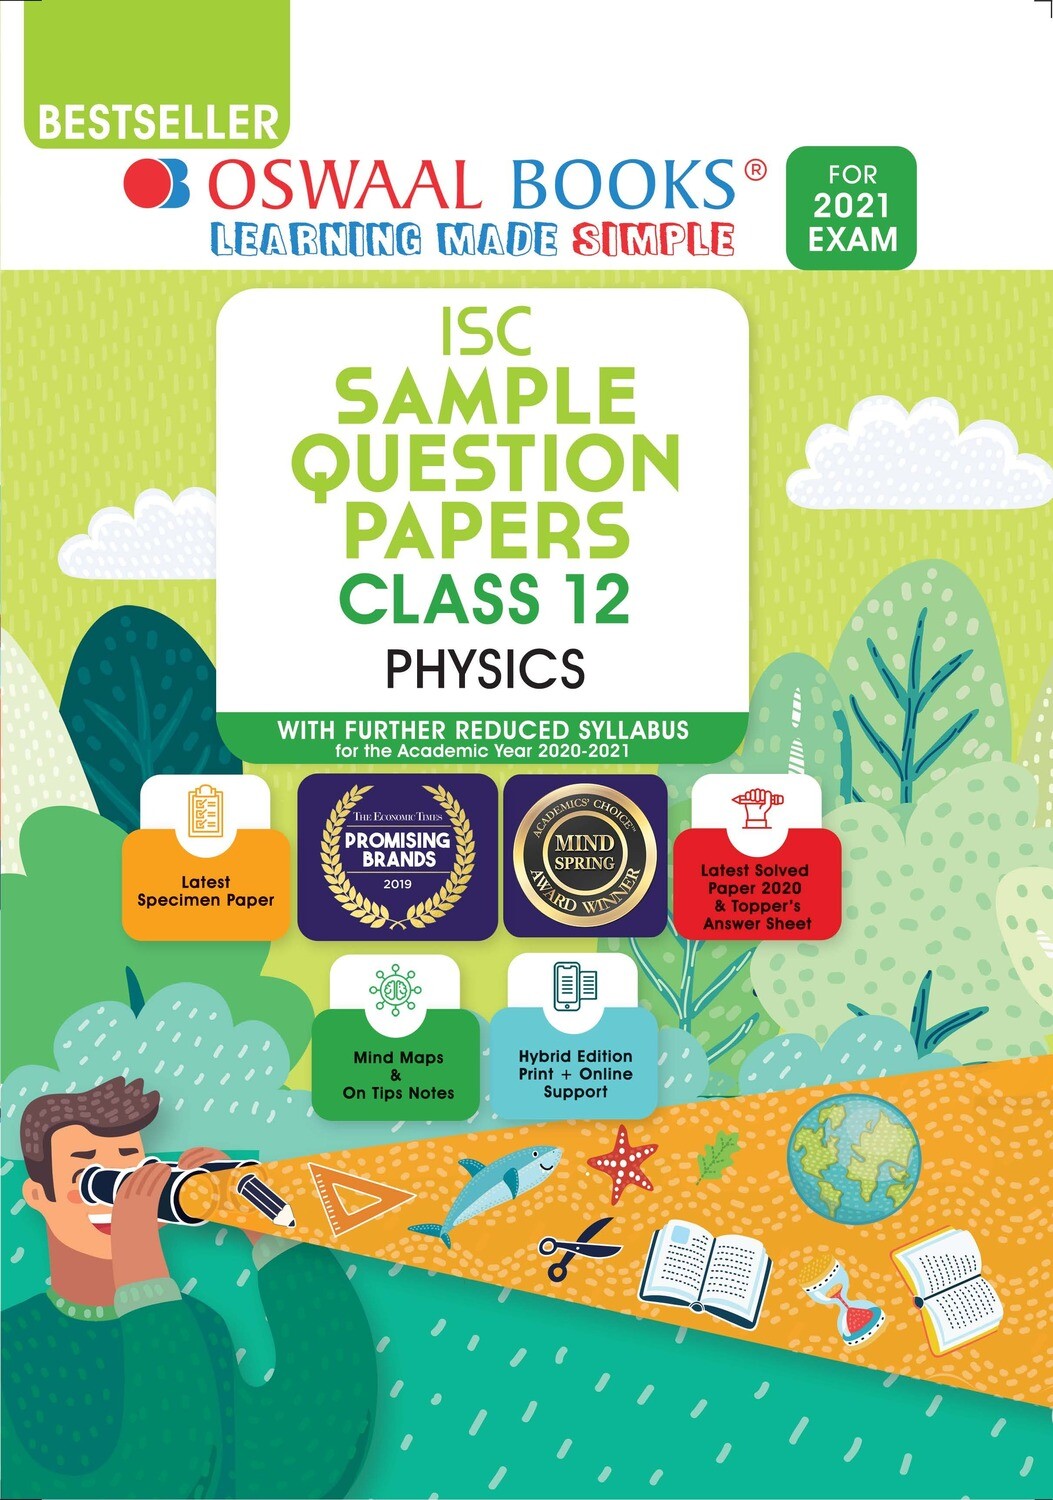 Buy e-book: Oswaal ISC Sample Question Papers Class 12 Physics (For 2021 Exam): 9789354230202